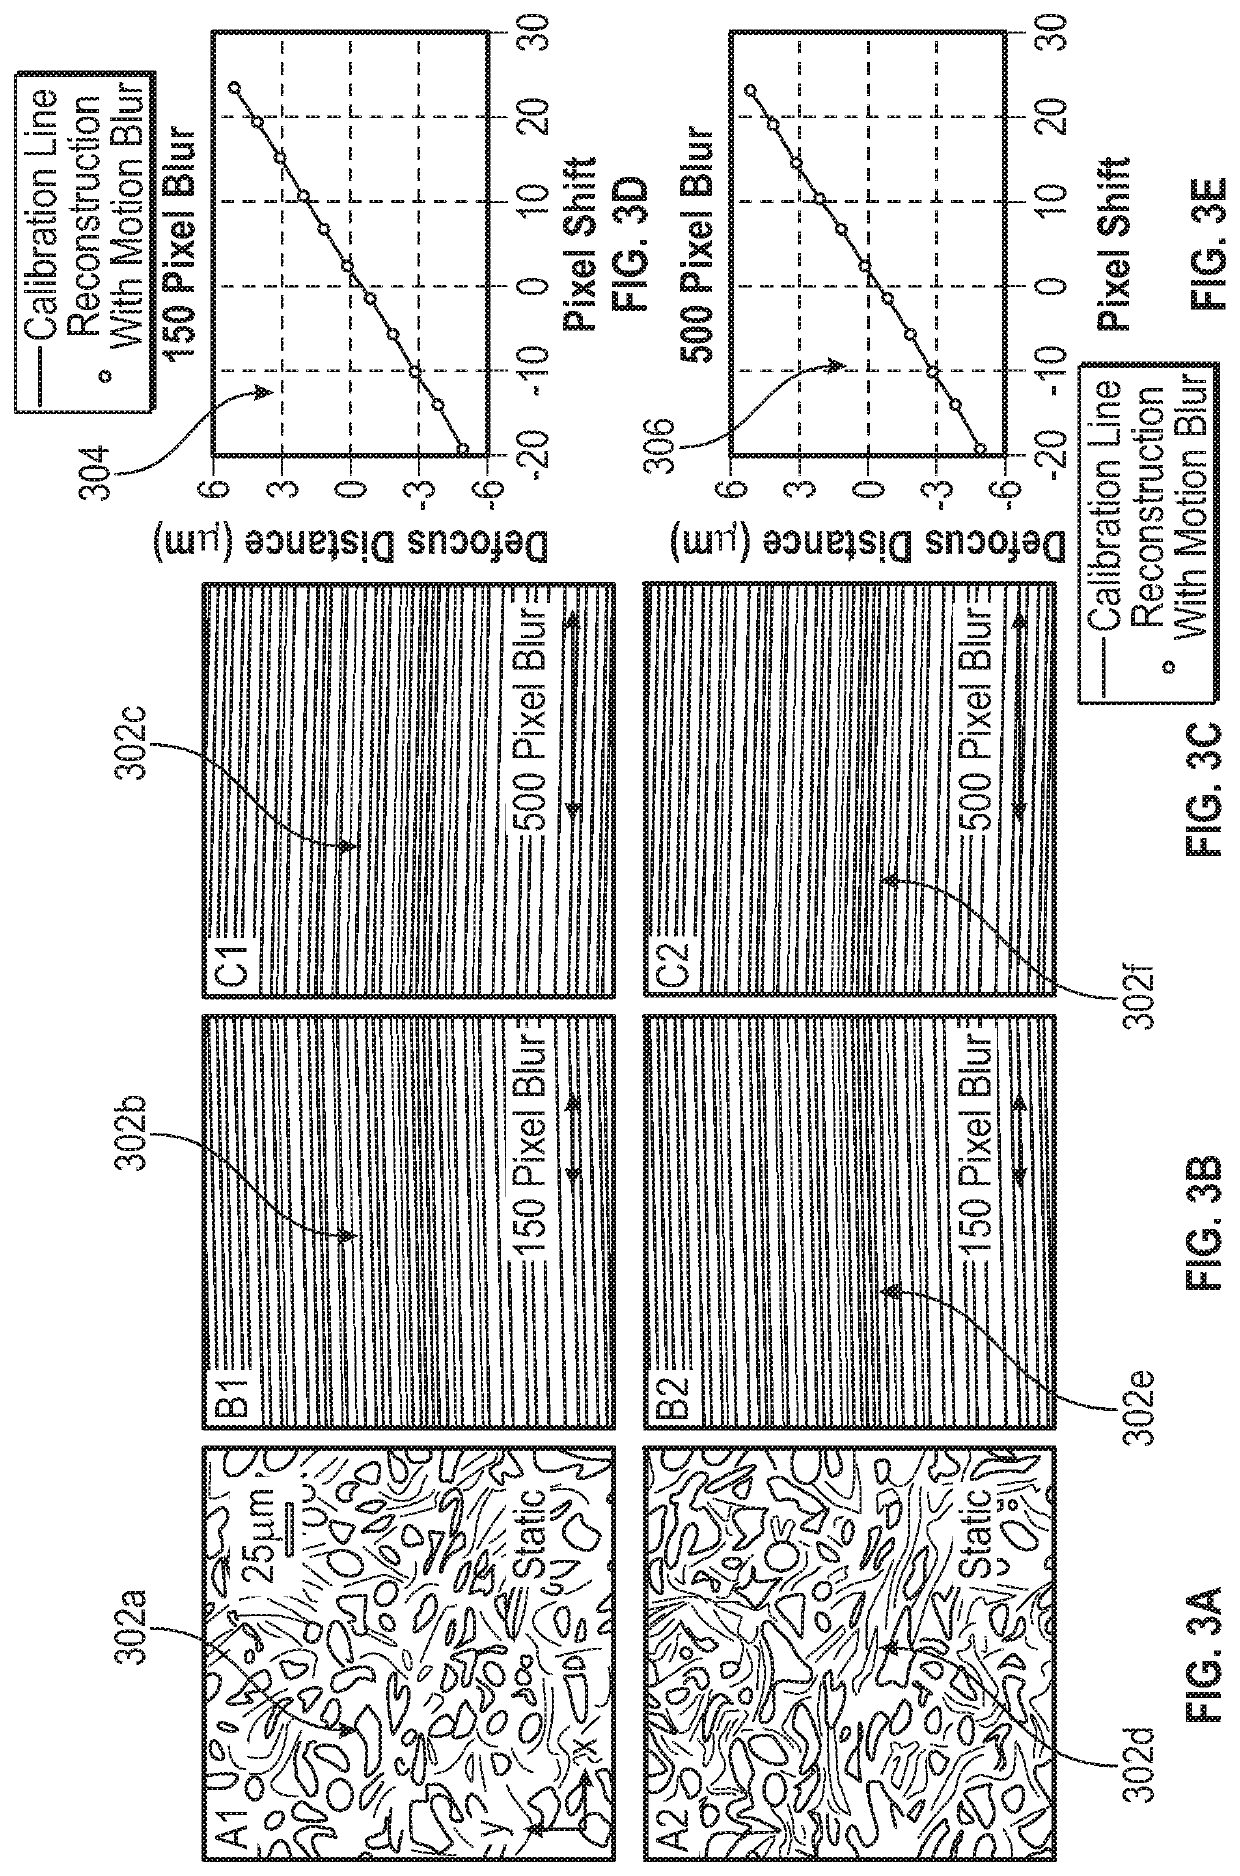 Methods and Systems for Single Frame Autofocusing Based on Color-Multiplexed Illumination